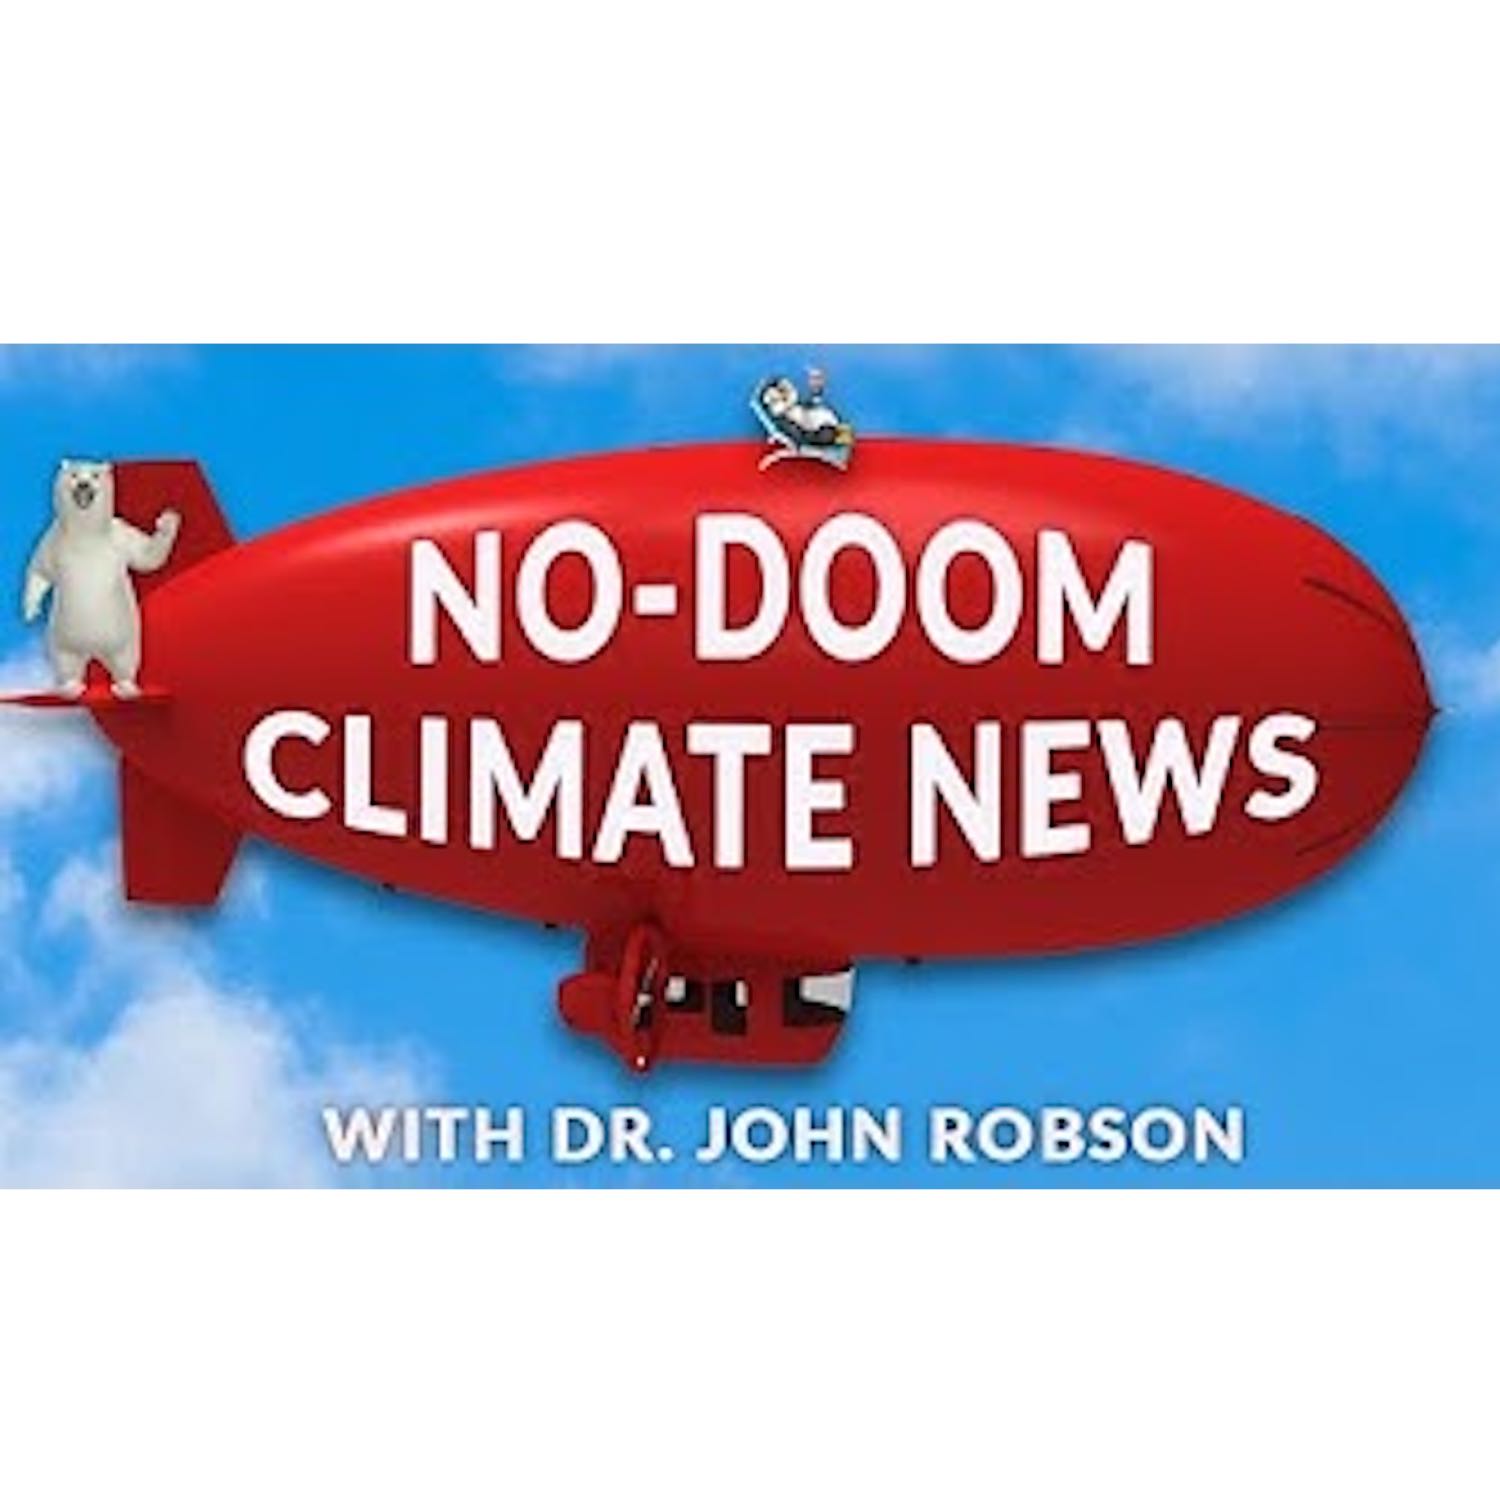 Climate facts and studies the New York Times and BBC will never publish.